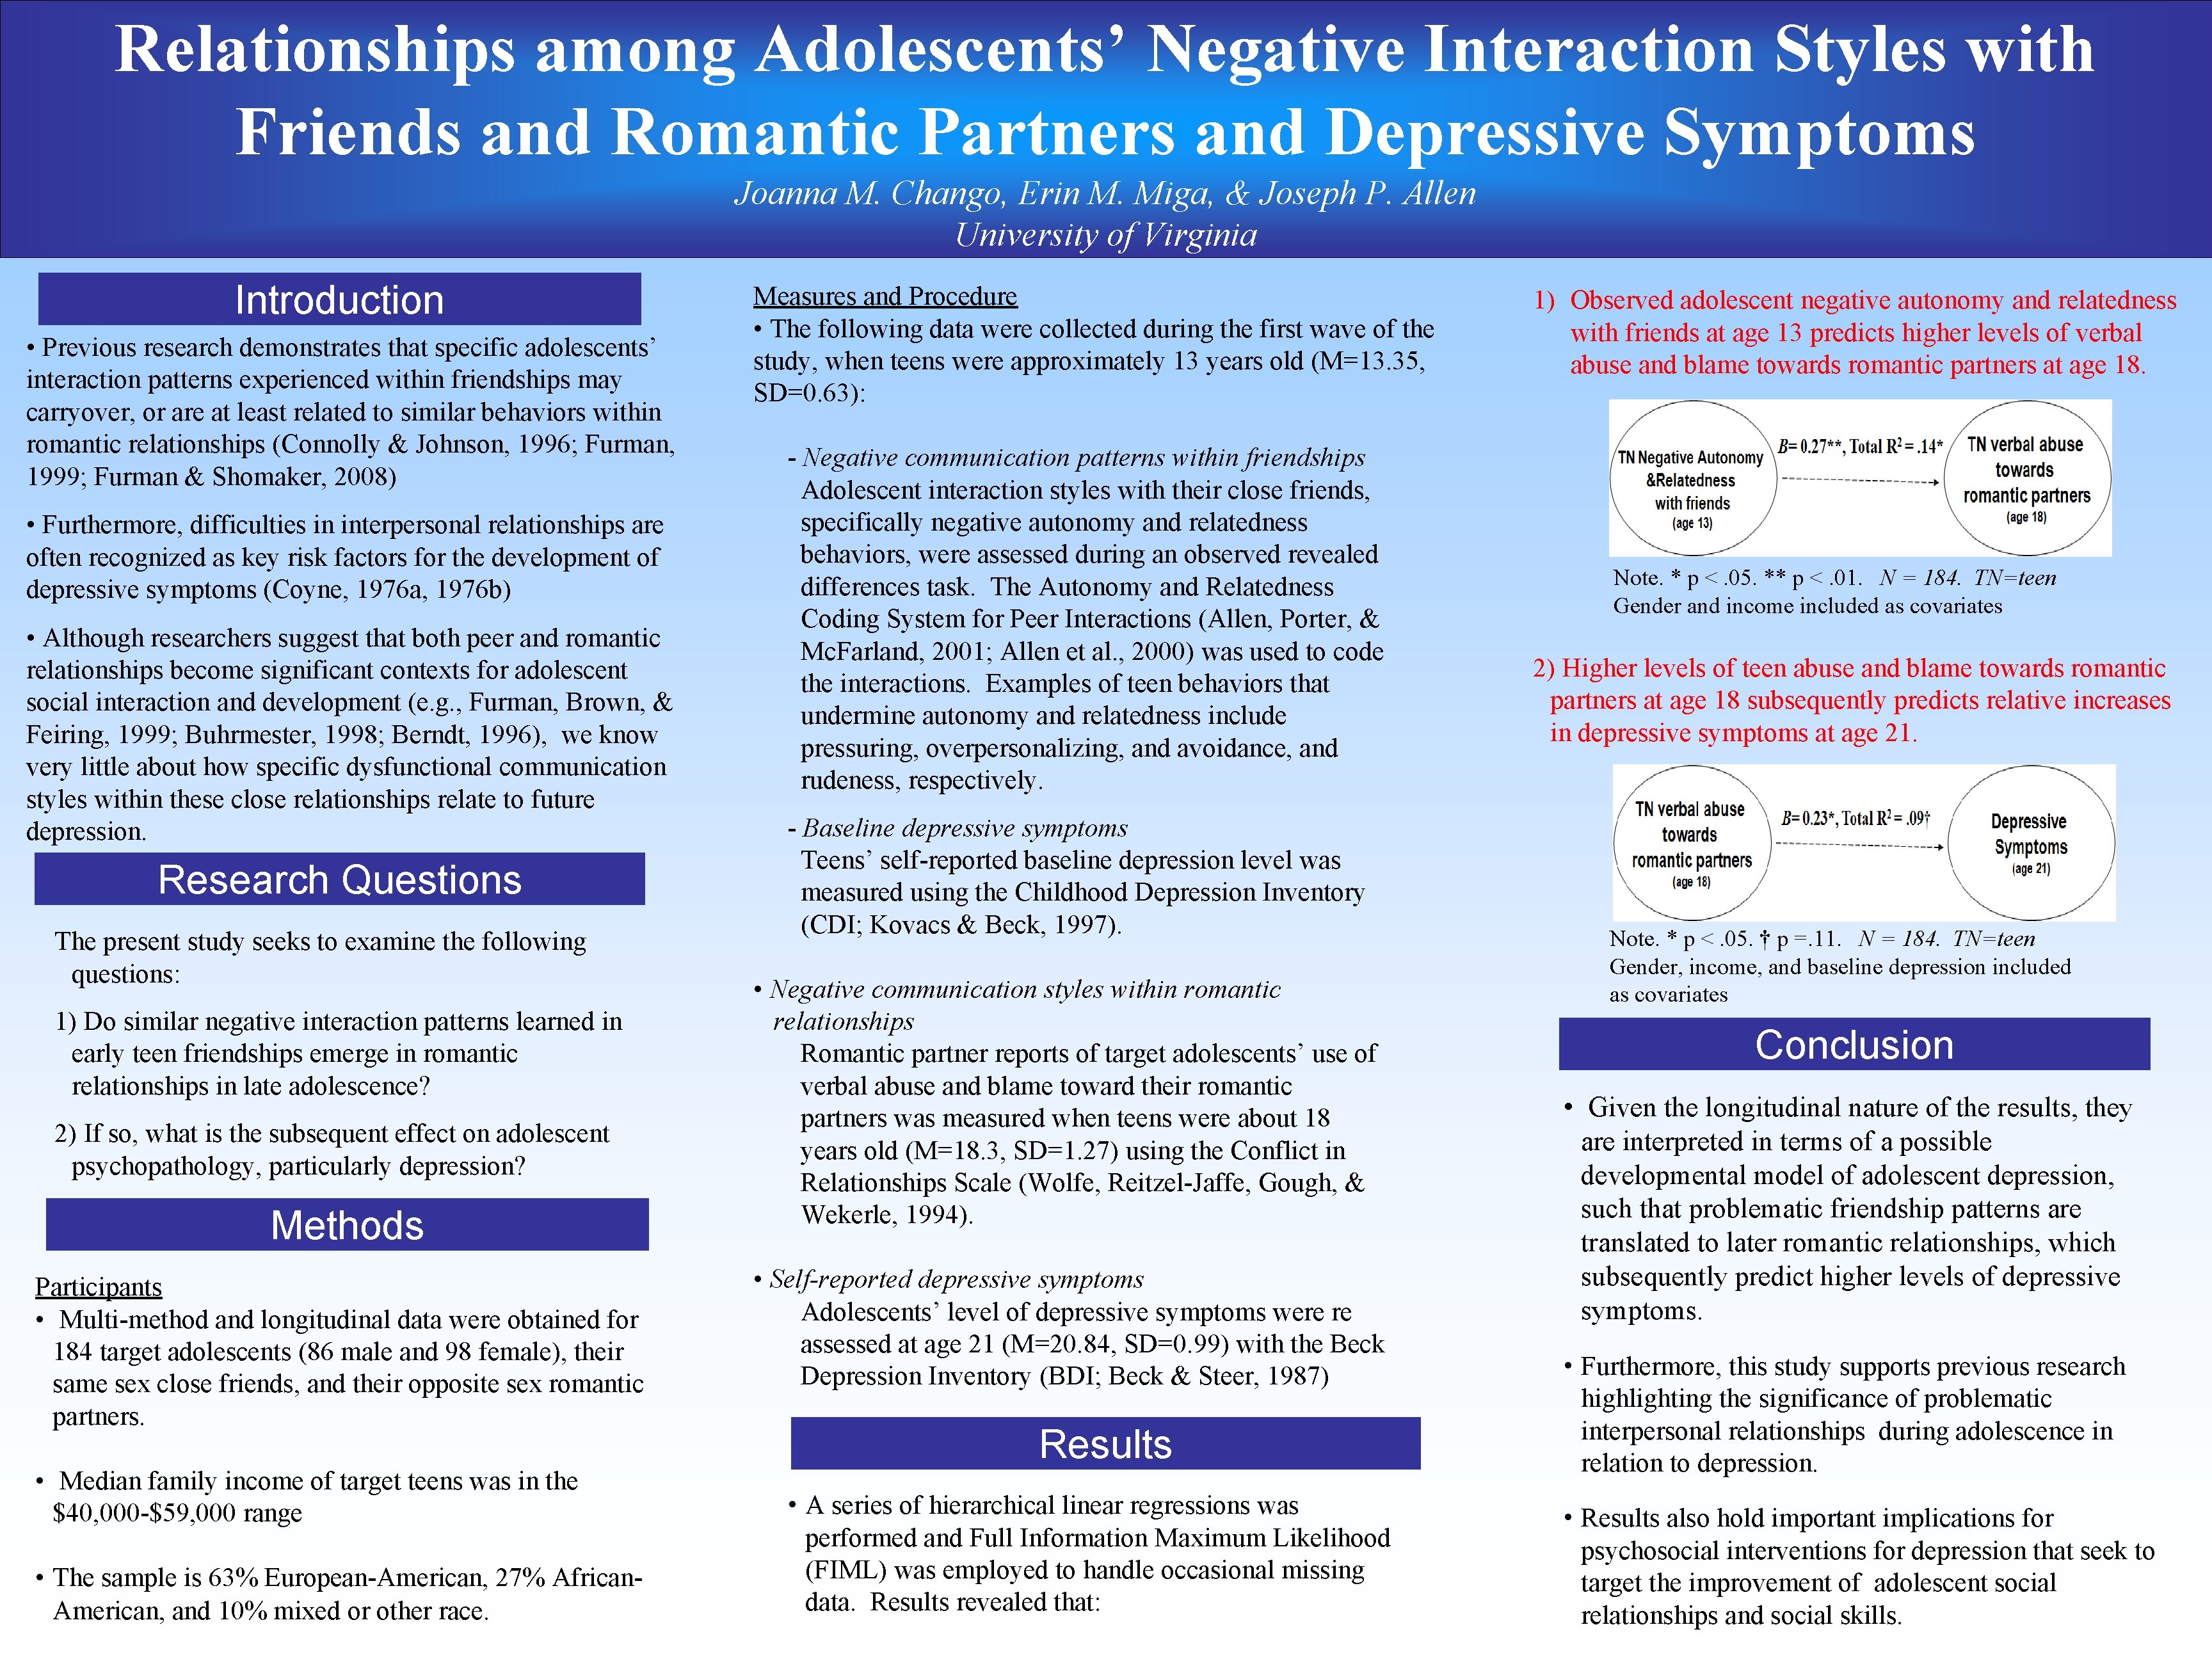 Relationships among Adolescents’ Negative Interaction Styles with Friends and Romantic Partners and Depressive Symptoms